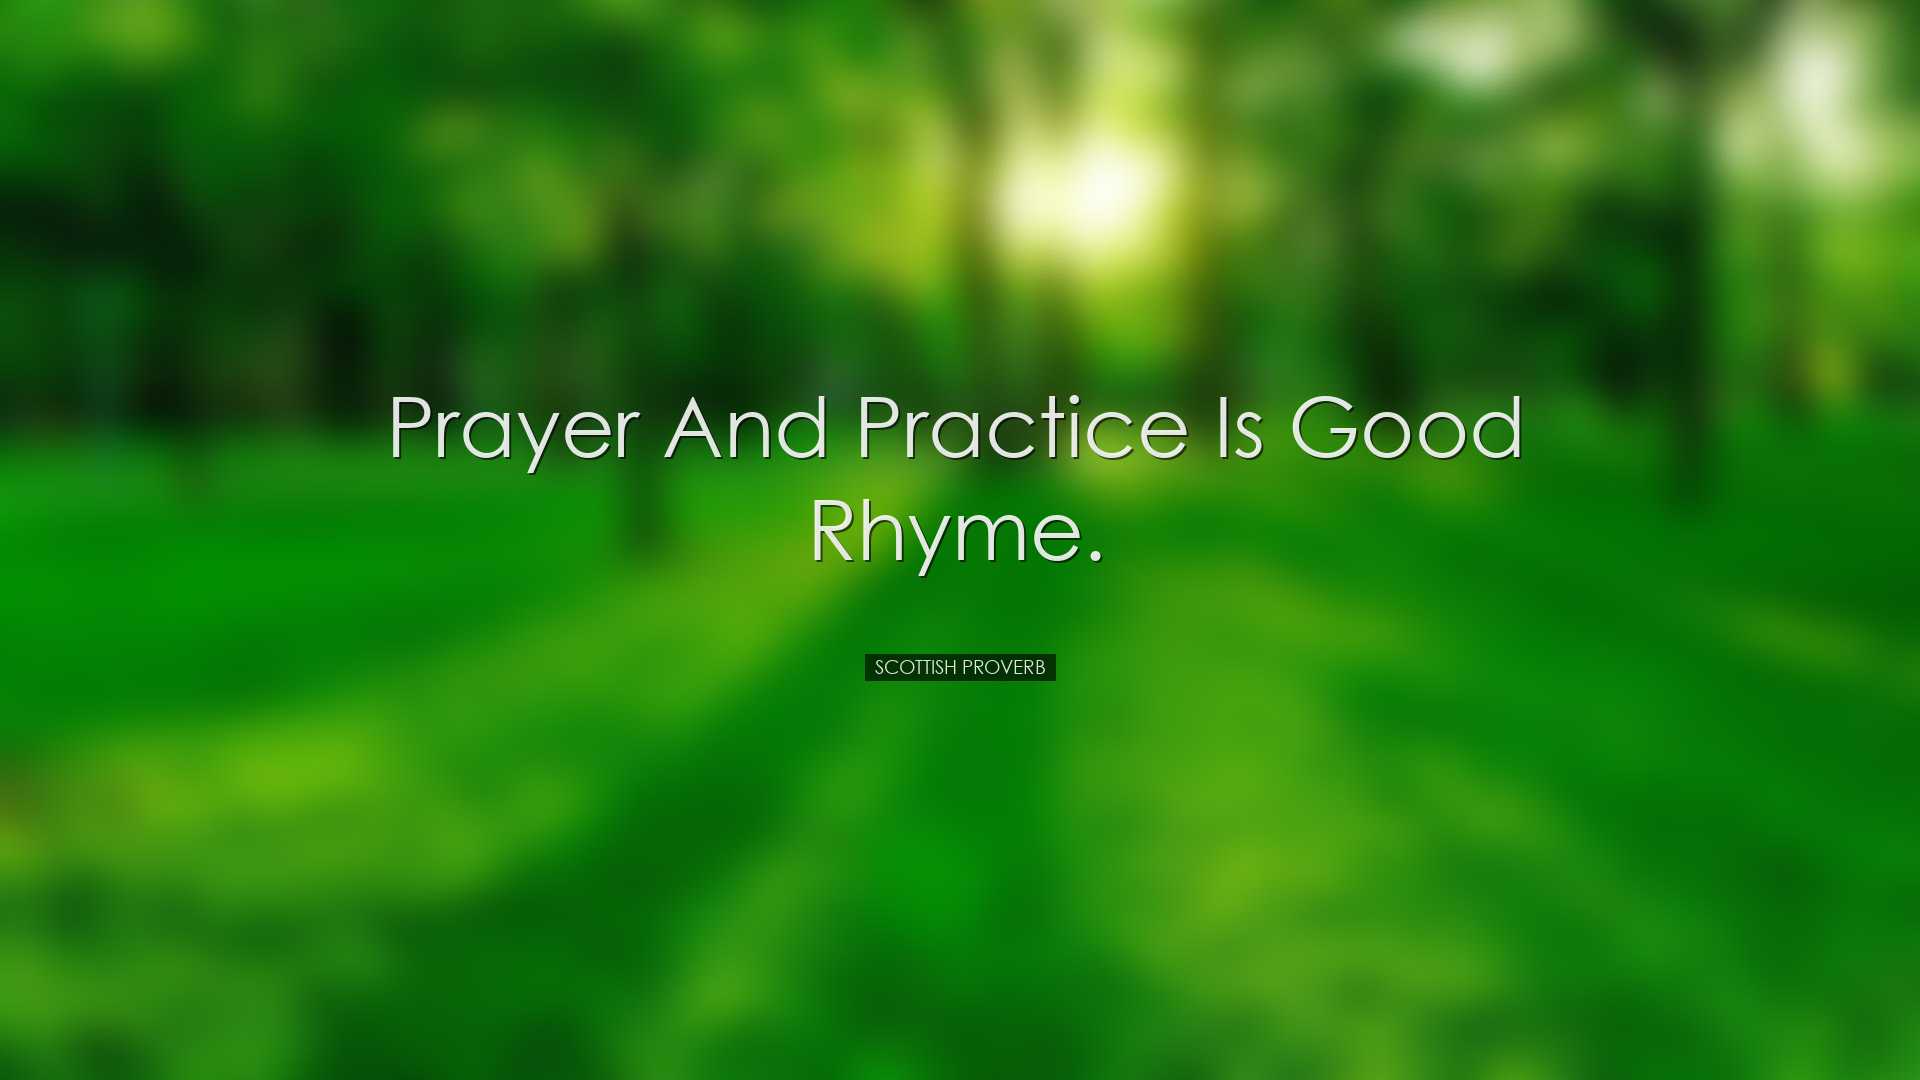 Prayer and practice is good rhyme. - Scottish Proverb